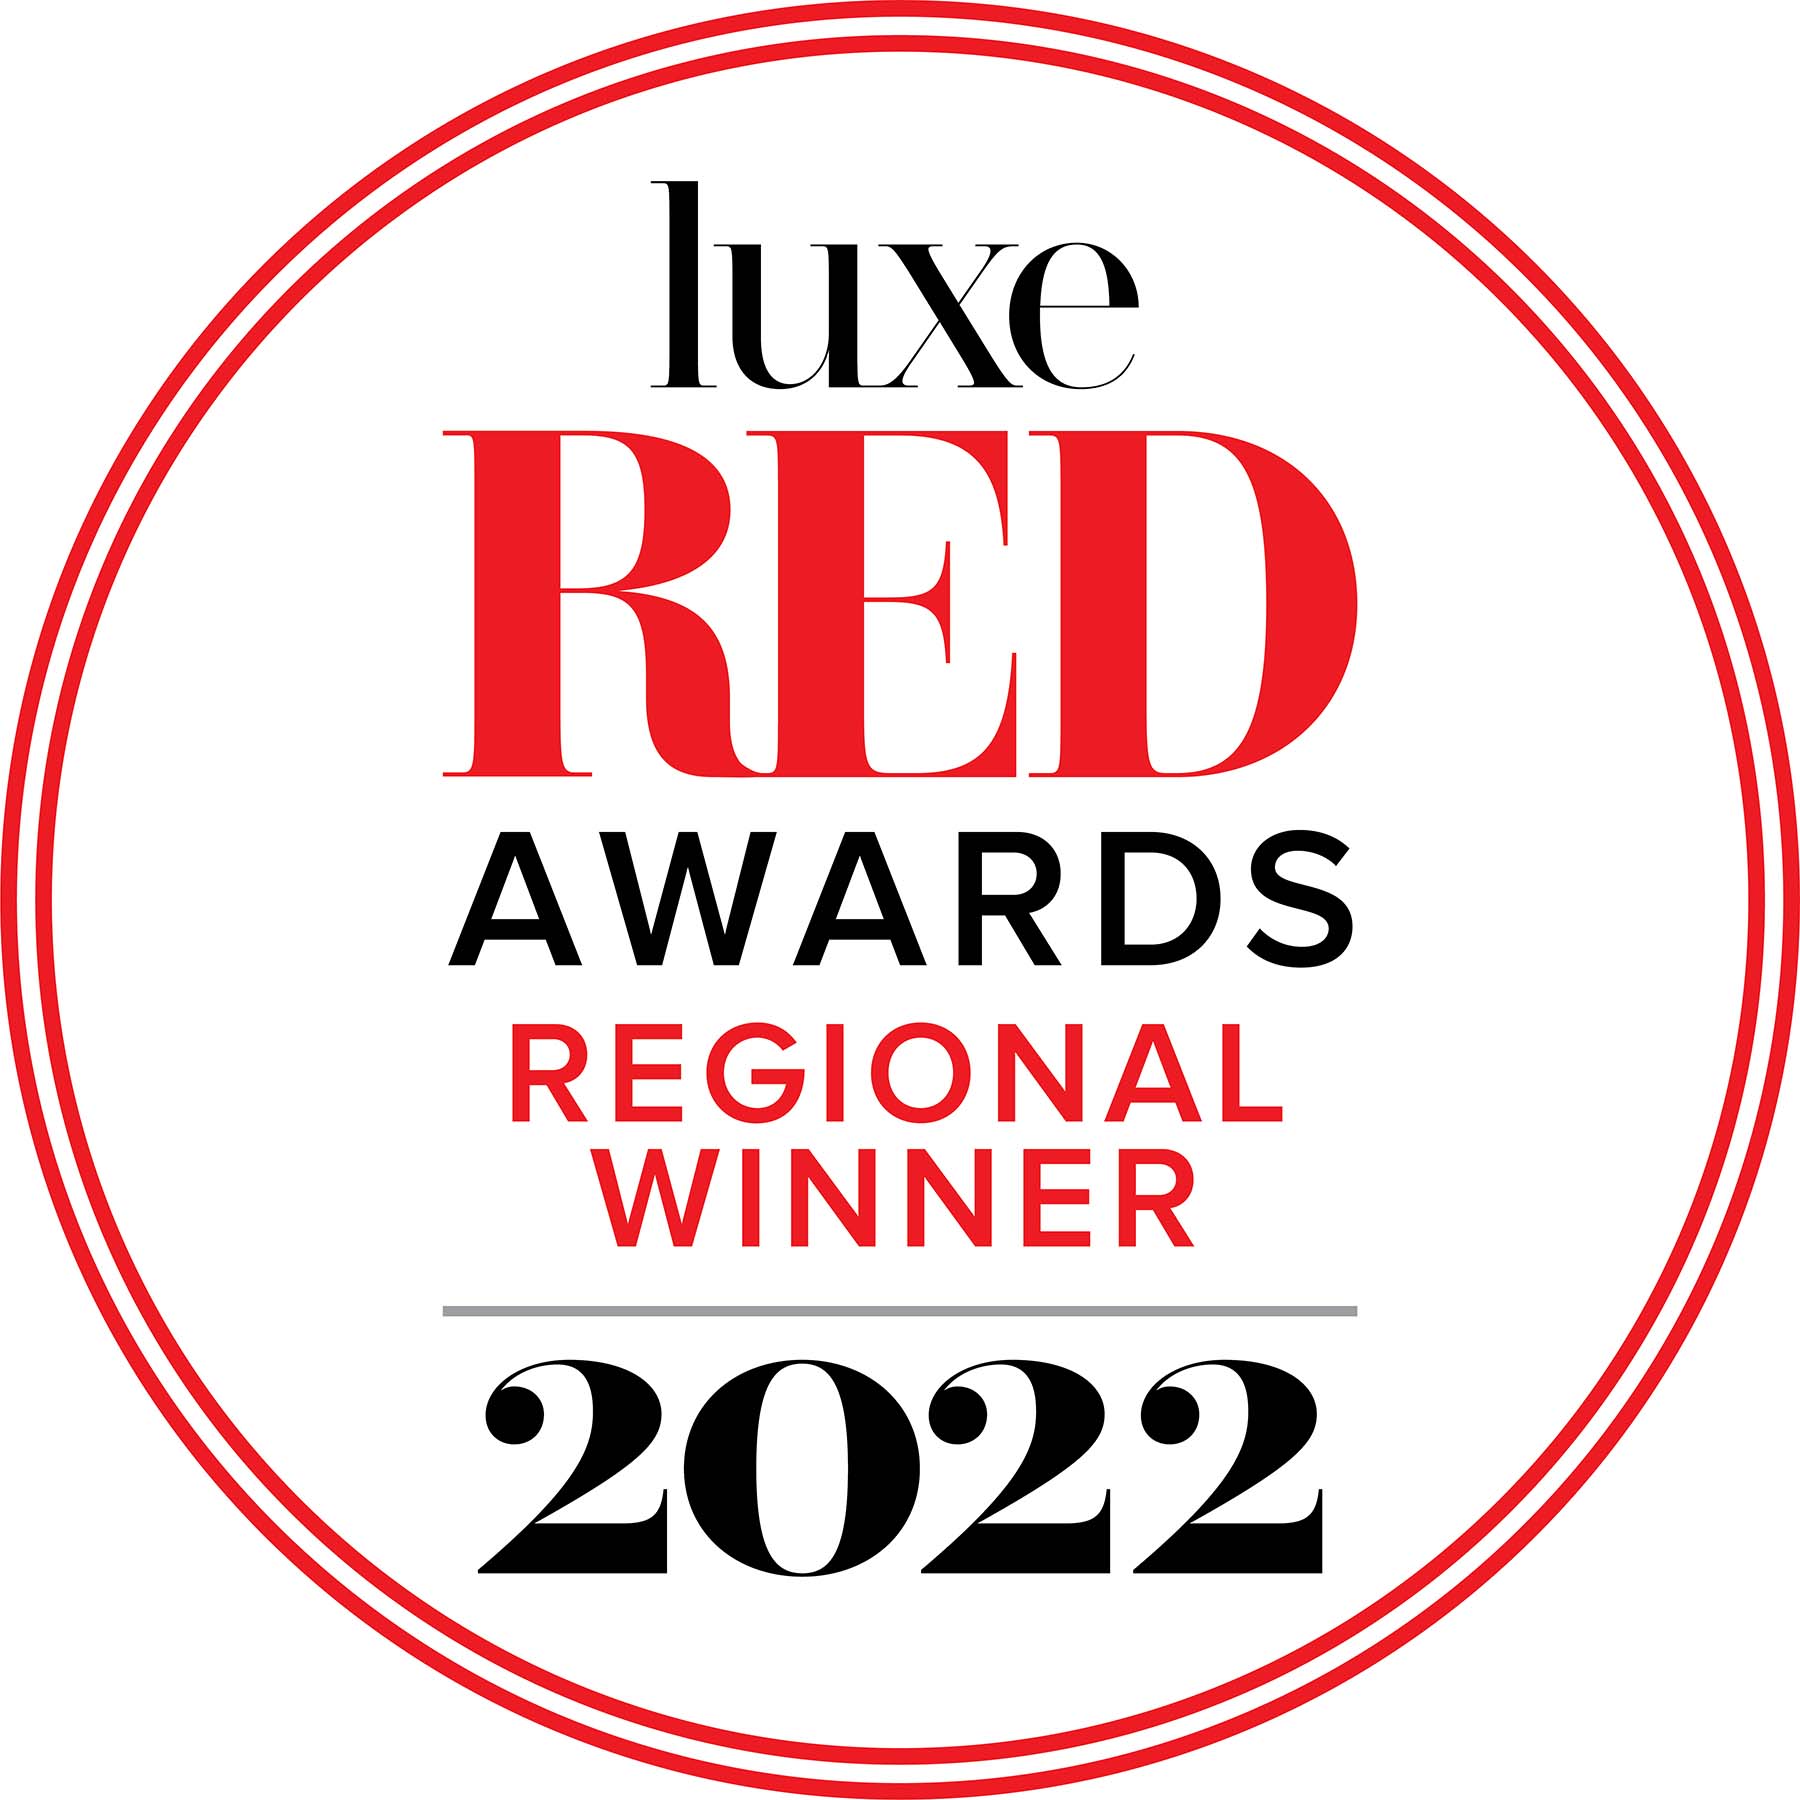 Luxe Red Awards 2022